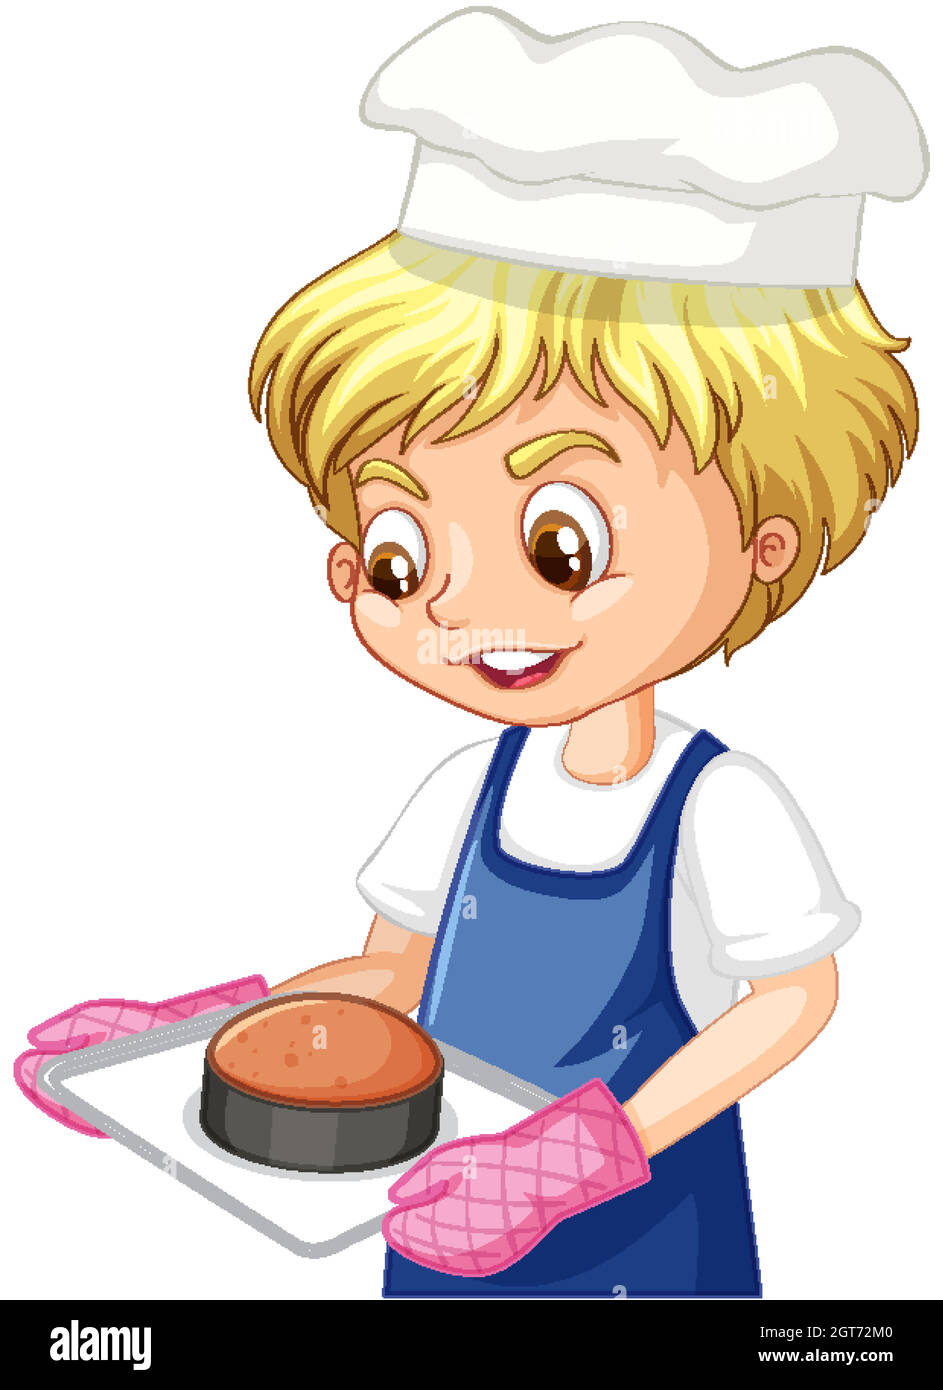 https://c8.alamy.com/comp/2GT72M0/cartoon-character-of-a-chef-boy-holding-tray-of-cake-2GT72M0.jpg